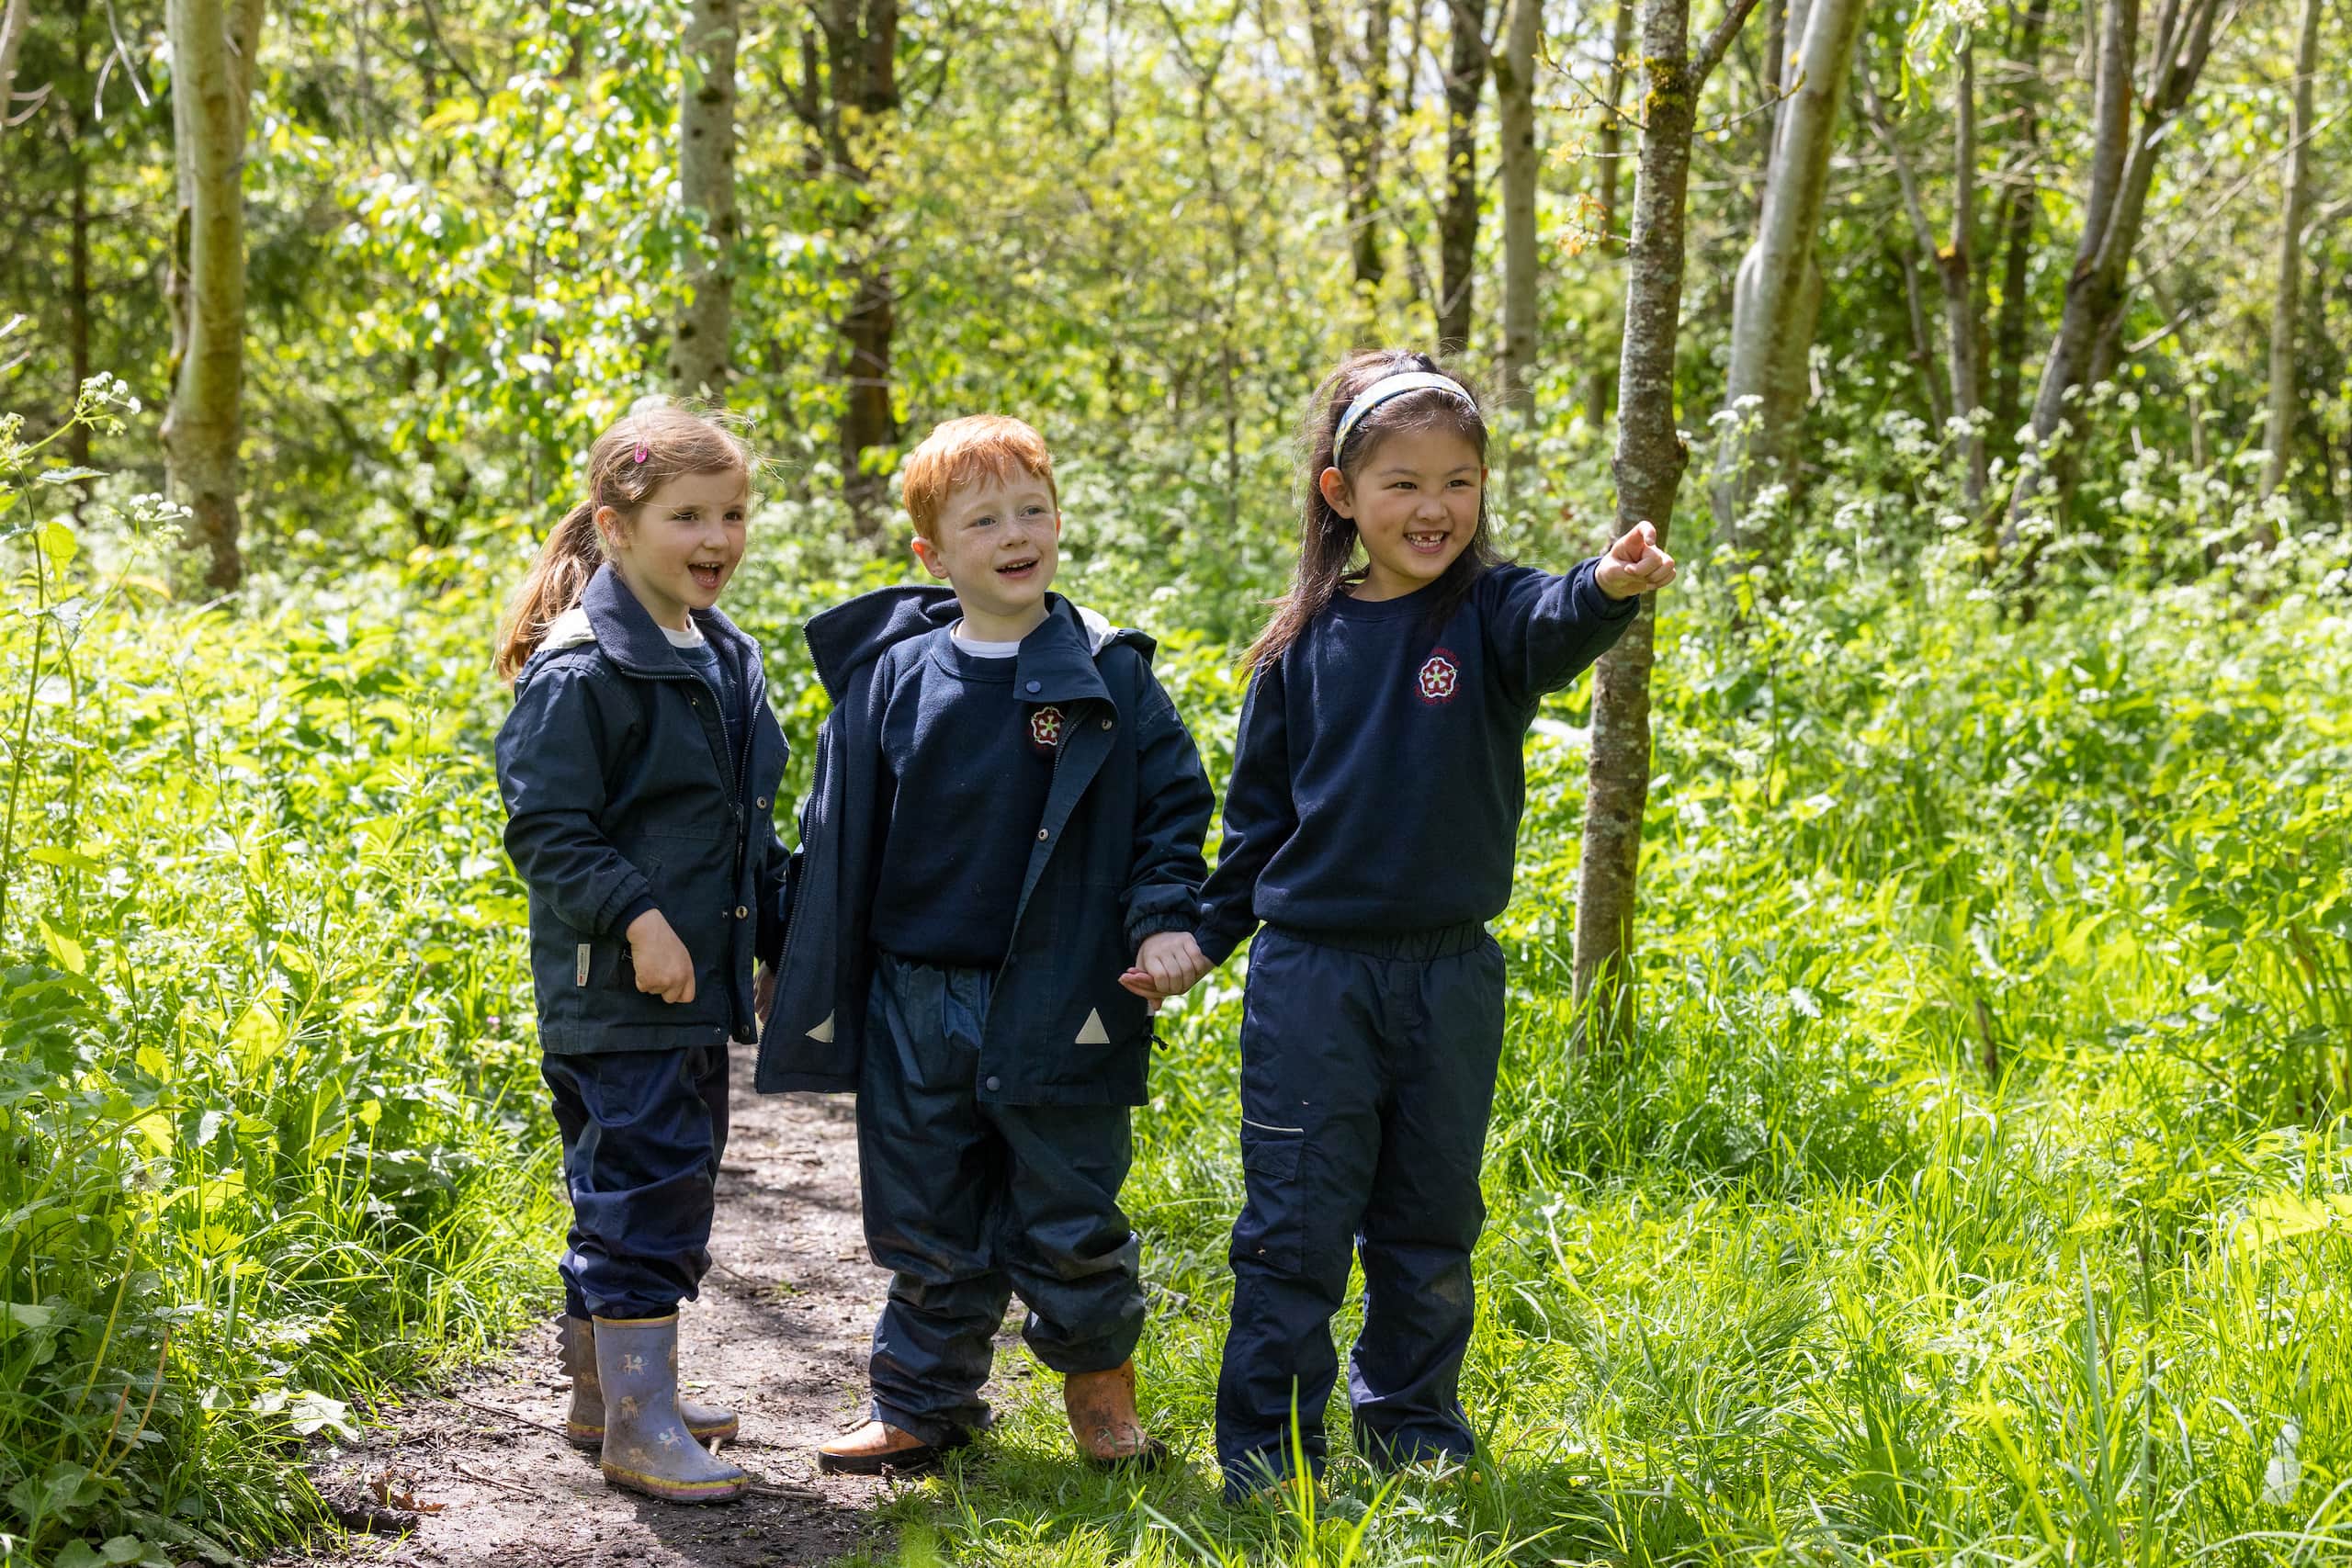 Three KES Bath pre-prep pupils standing in a forest